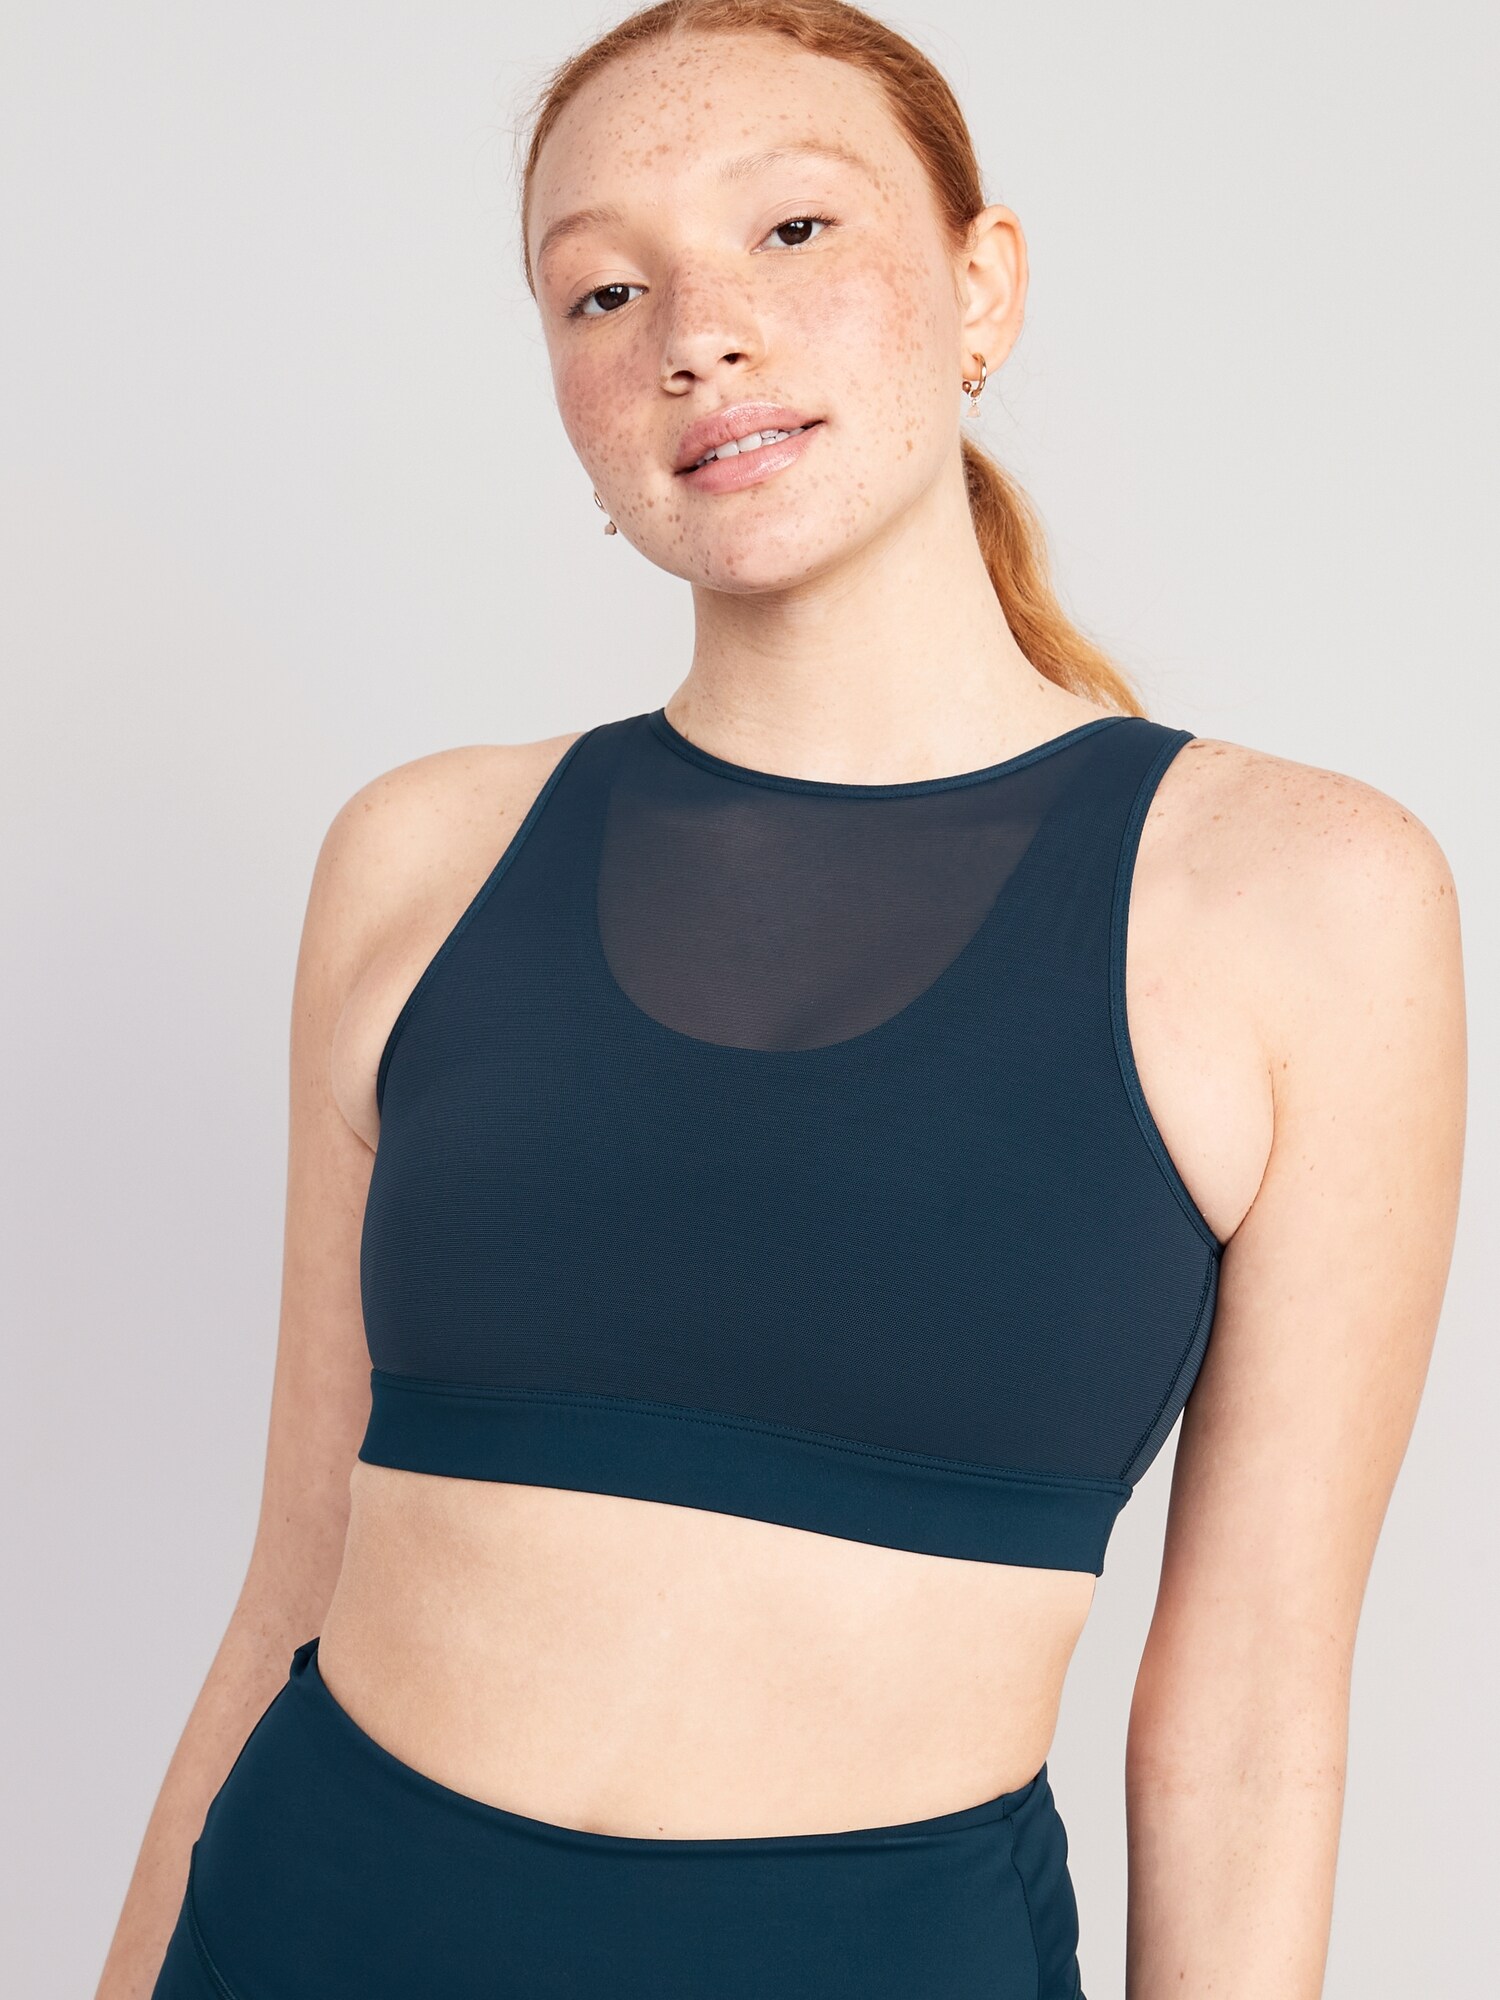 Old Navy PowerSoft Molded Cup Longline Sports Bra for Women, Old Navy  deals this week, Old Navy weekly ad